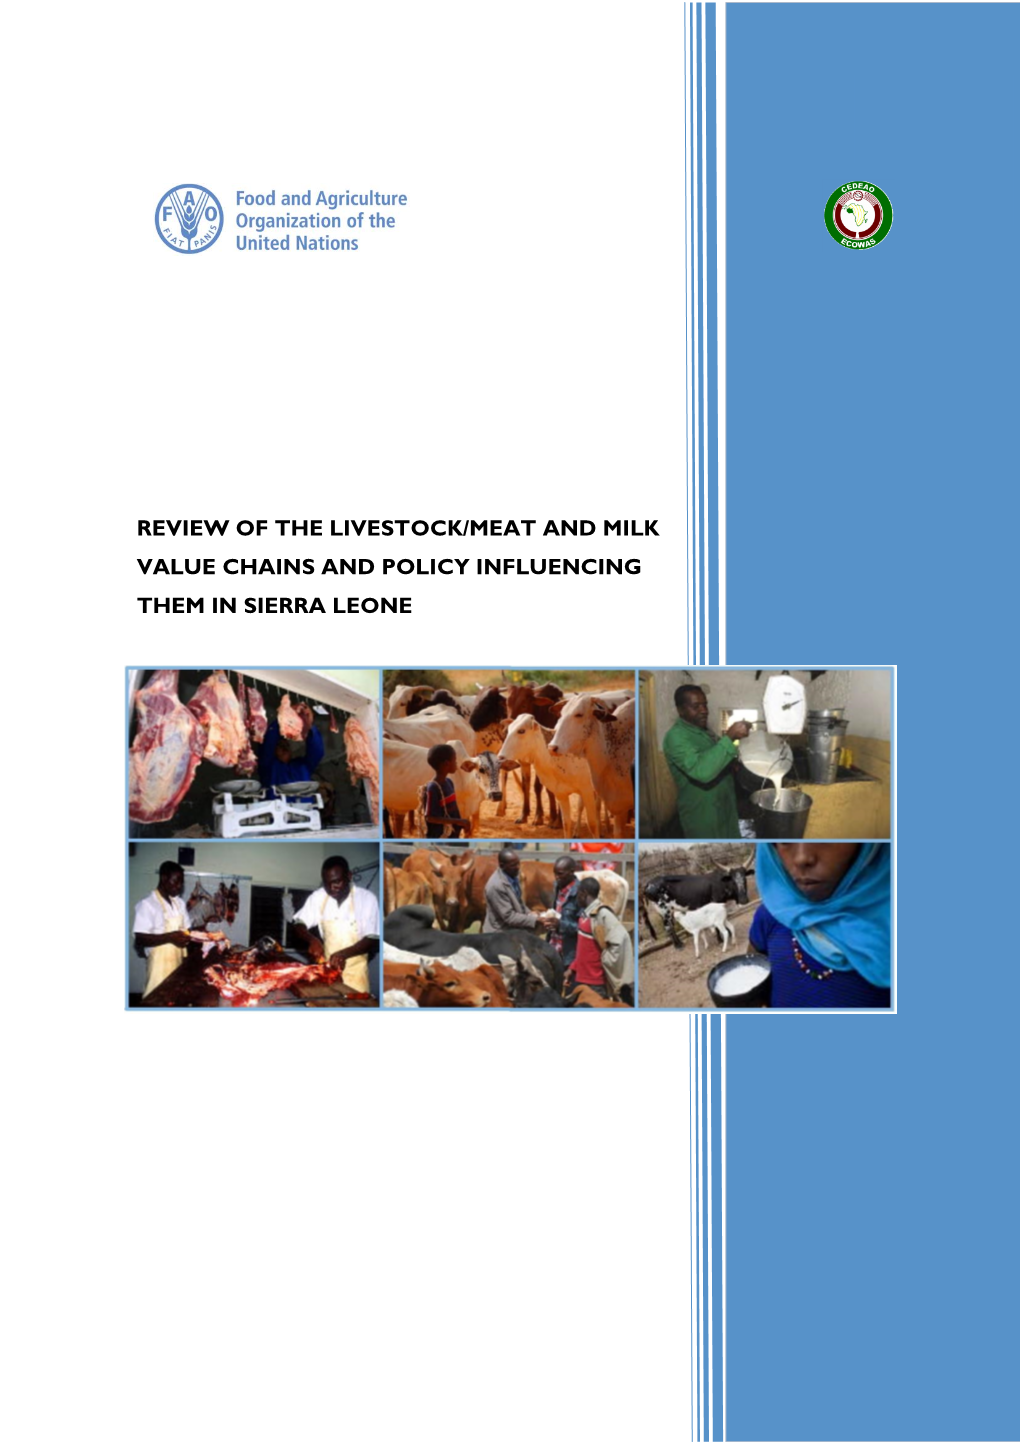 Review of the Livestock/Meat and Milk Value Chains and Policy Influencing Them in Sierra Leone